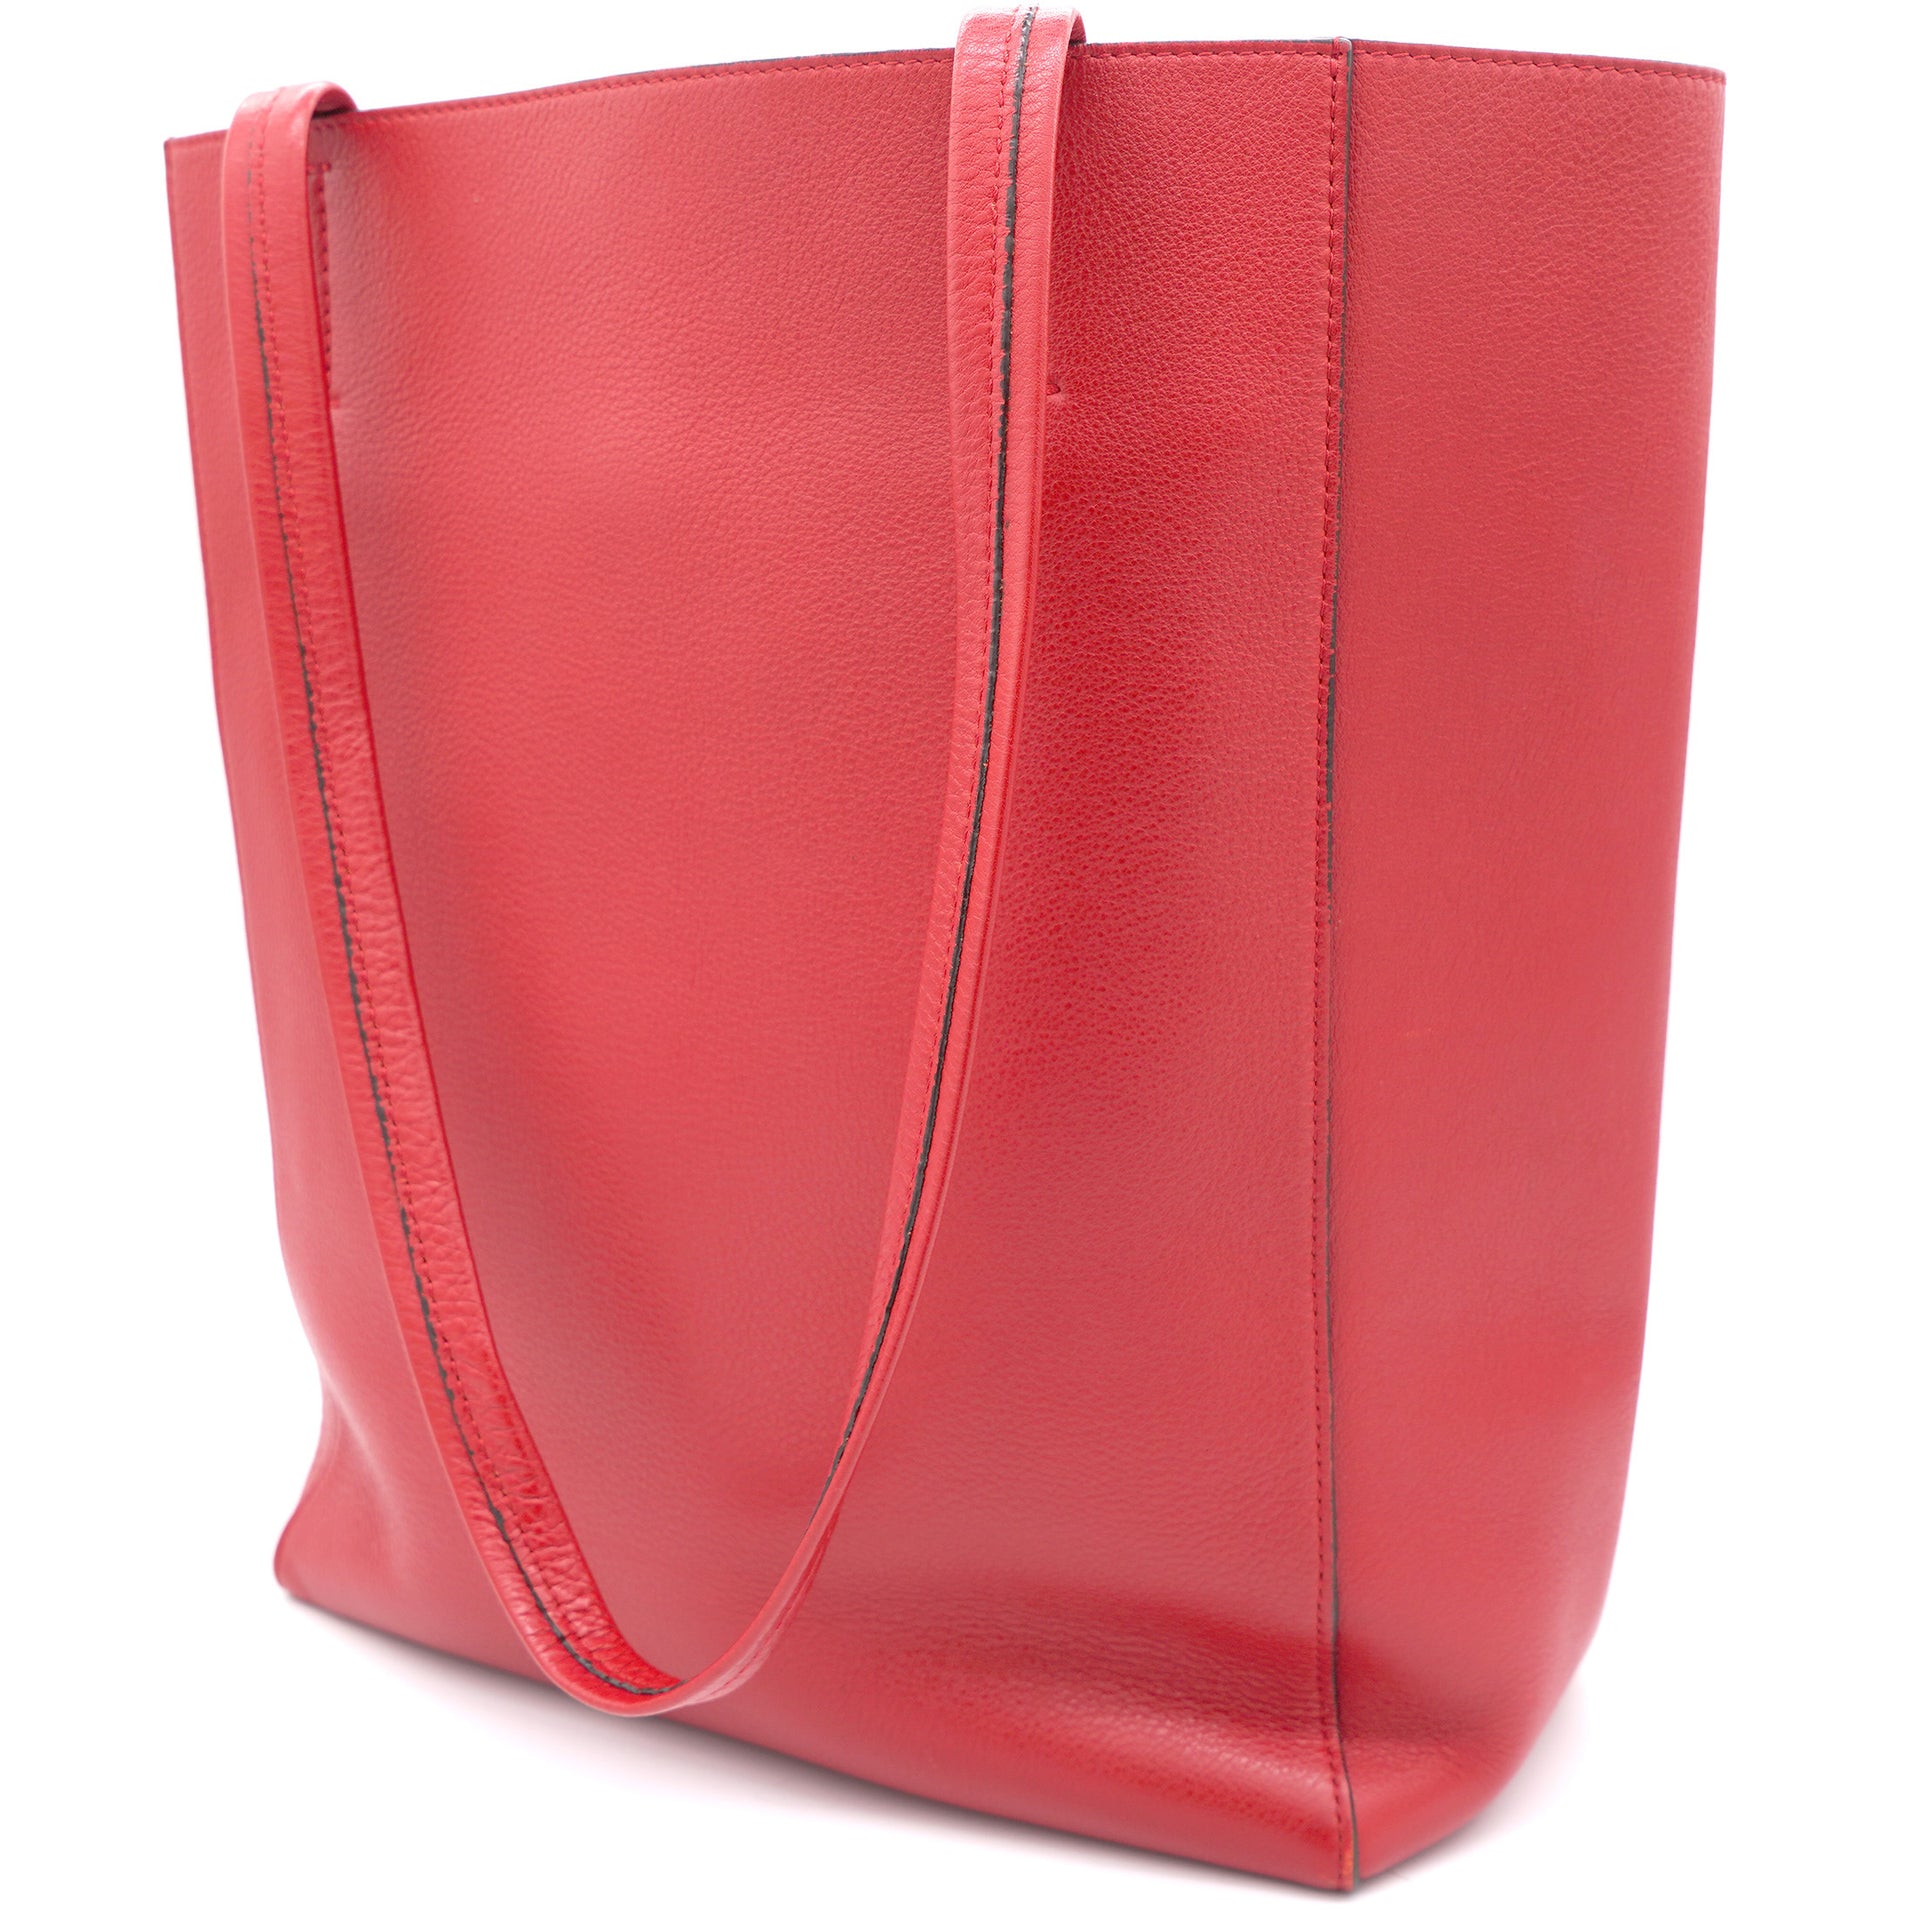 Red Grained Leather Small Horizontal Phantom Cabas Tote